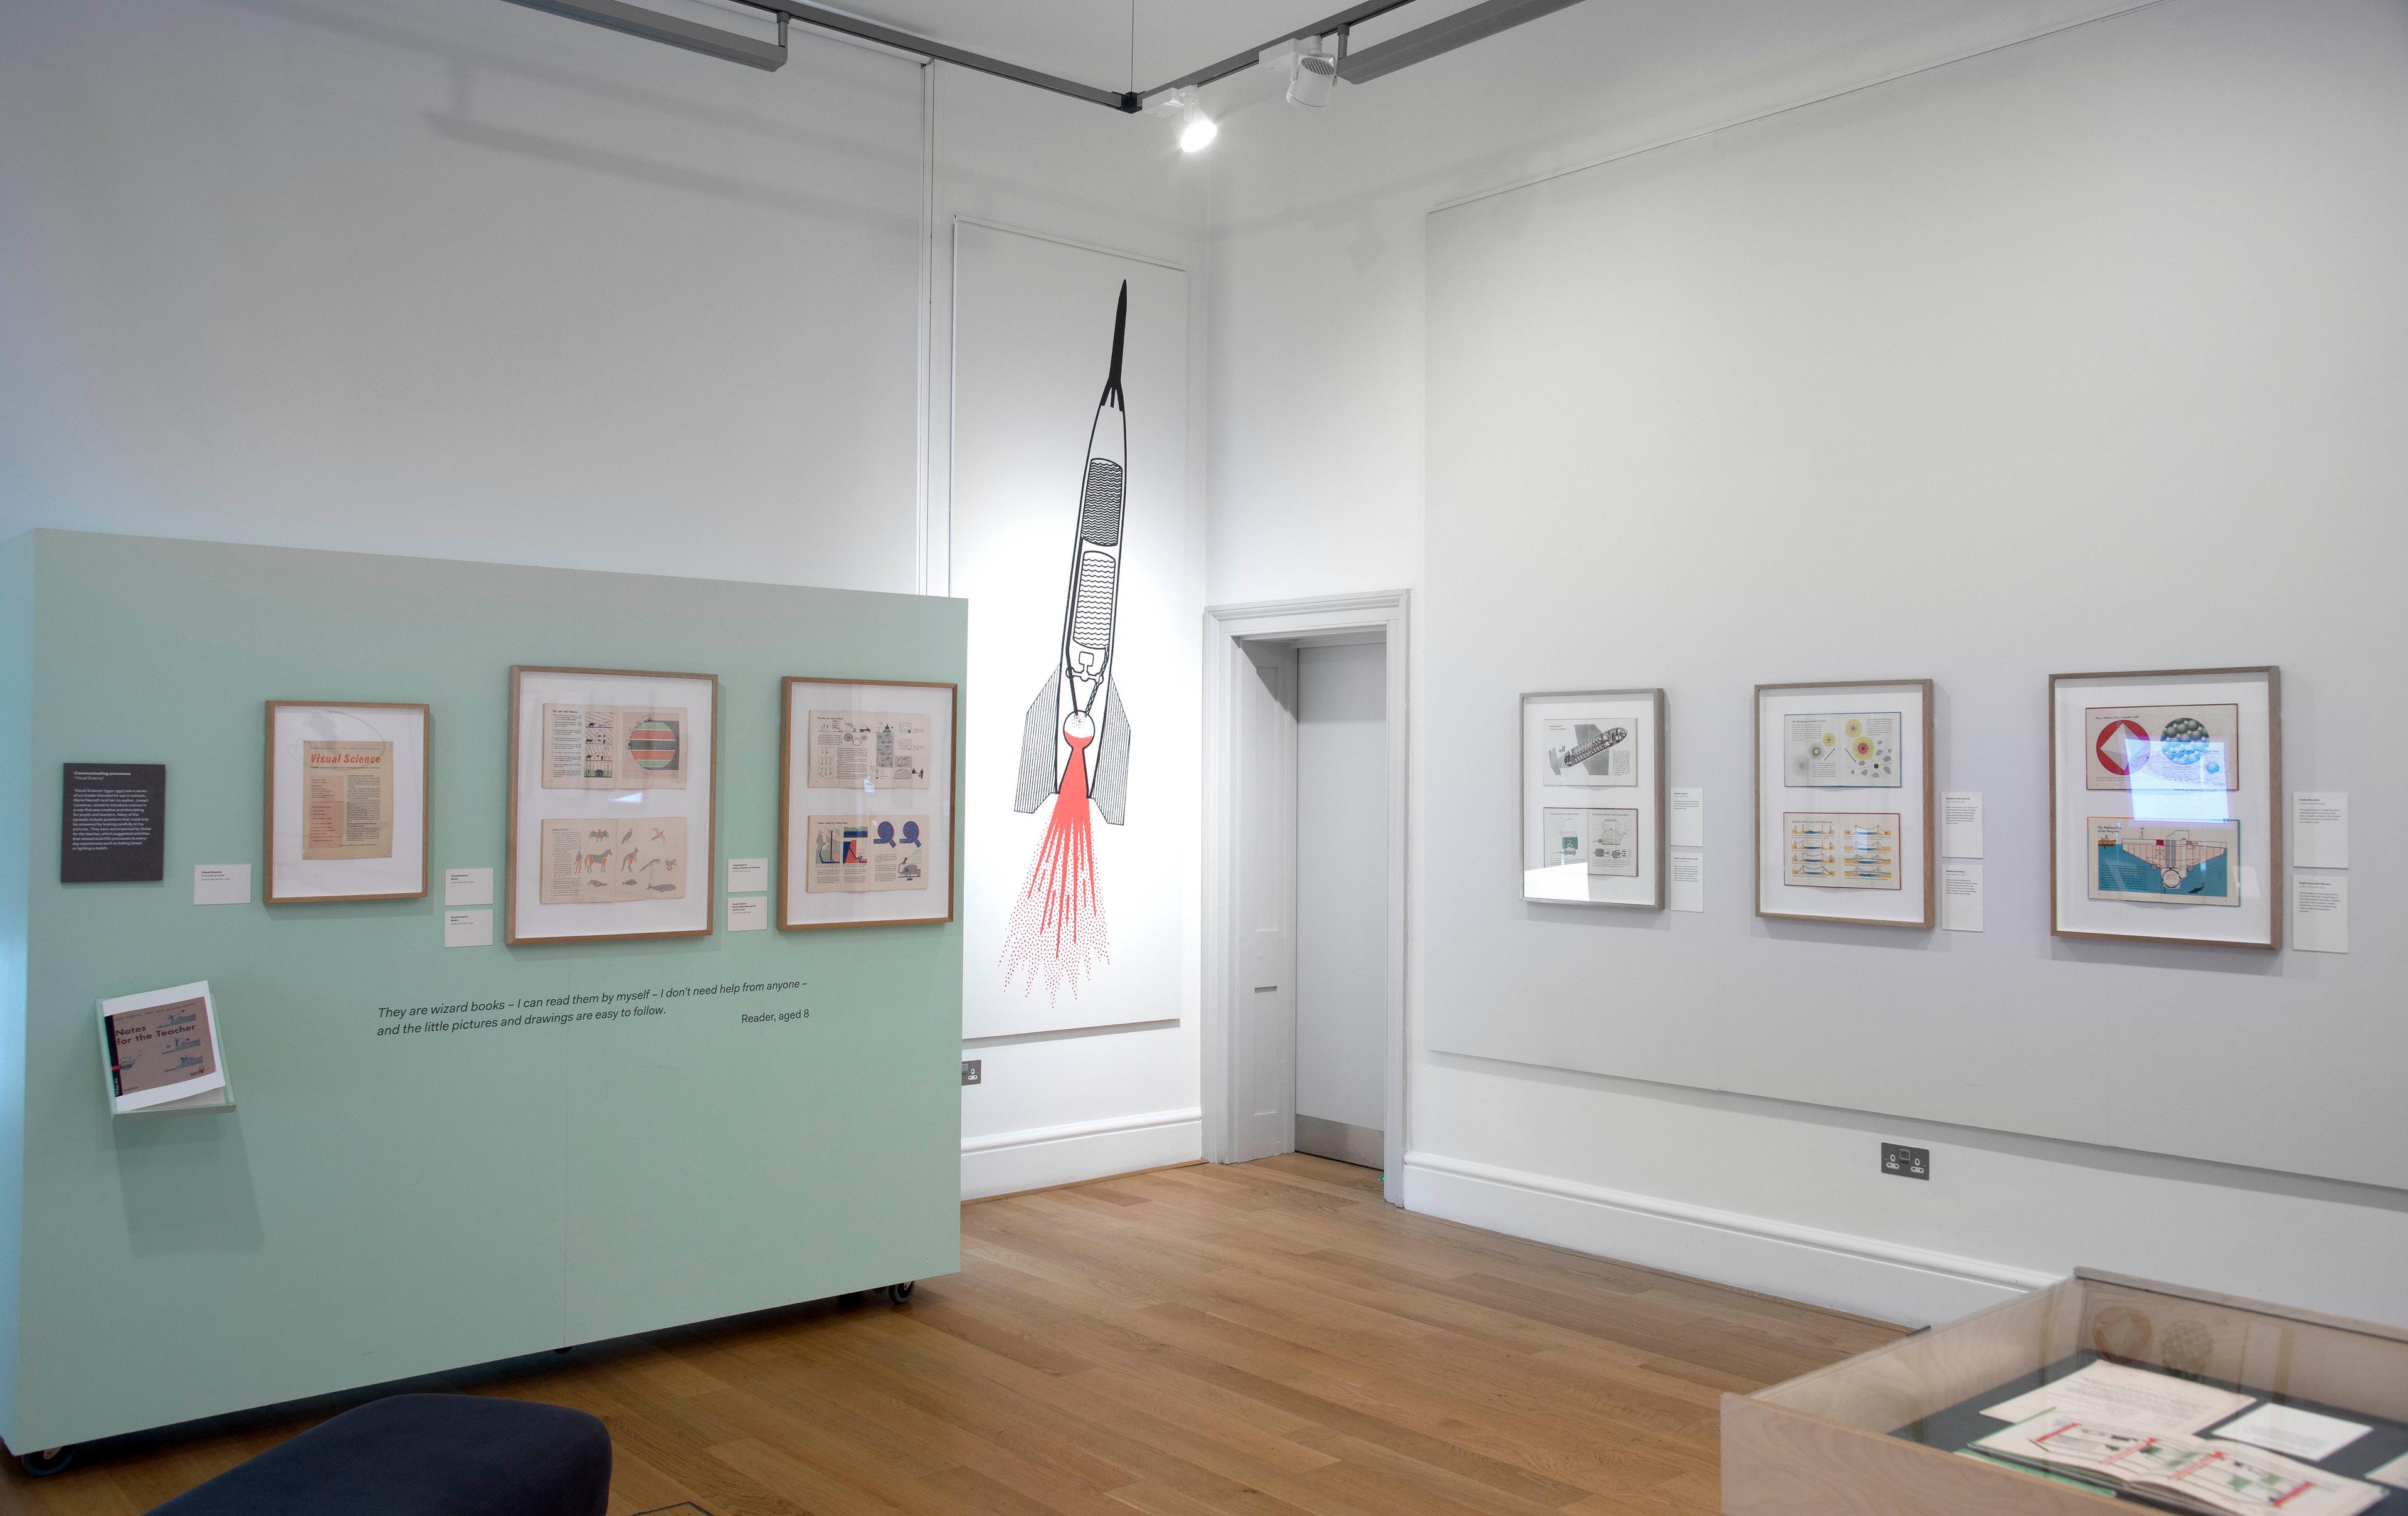 Photograph of the Marie Neurath exhibition at the House of Illustration